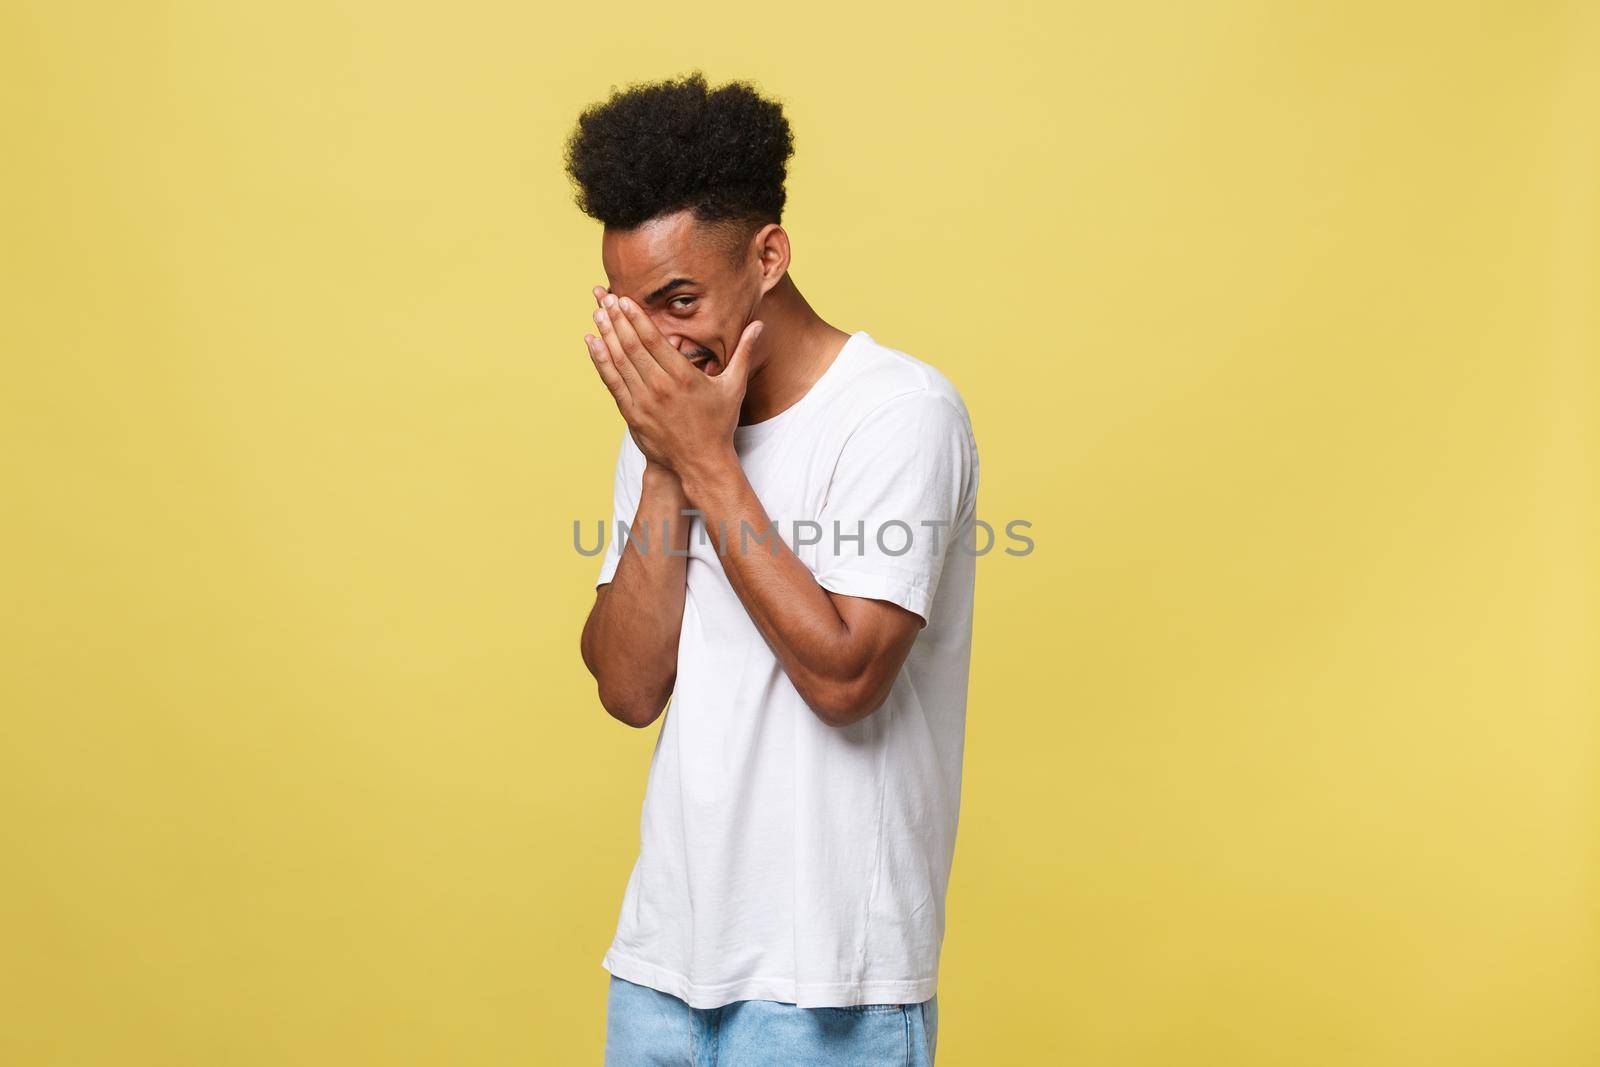 African american man with beard smiling having shy look peeking through fingers, covering face with hands looking confusedly broadly isolated over yellow background.